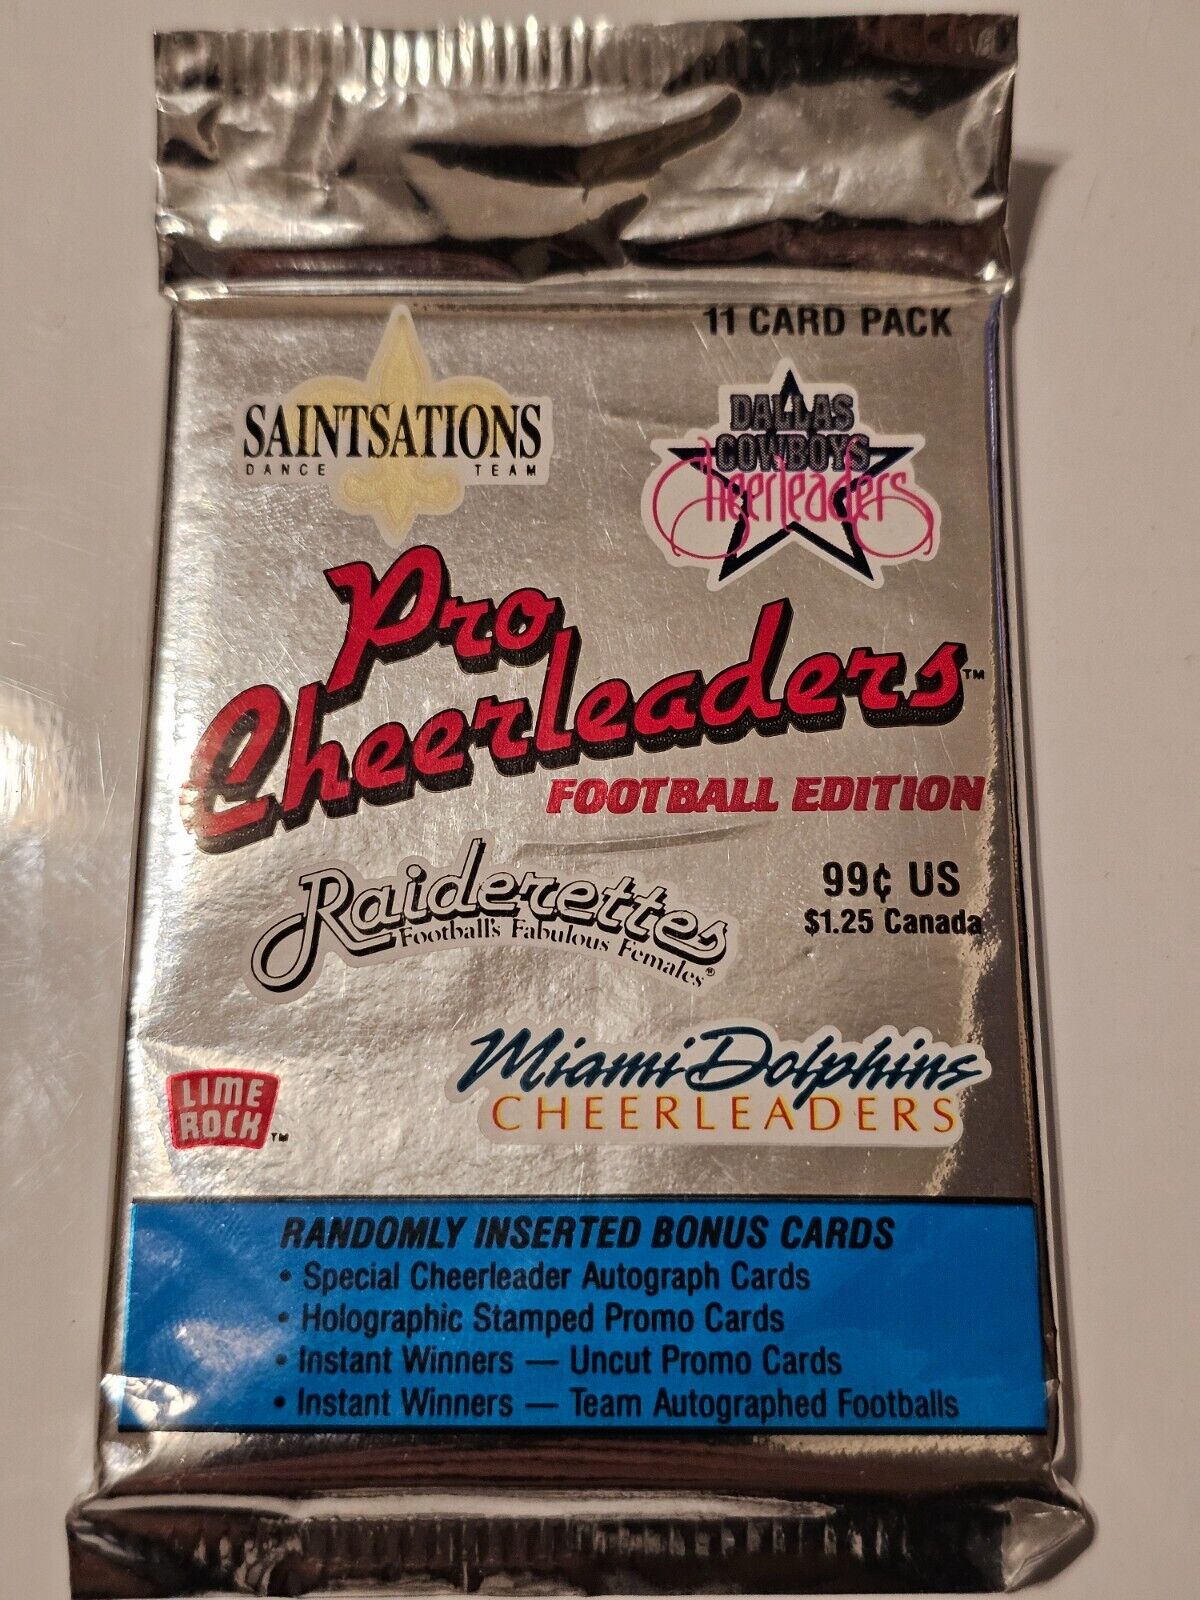 1992 Pro Cheerleaders Football Edition Cards Pack Sealed NEW